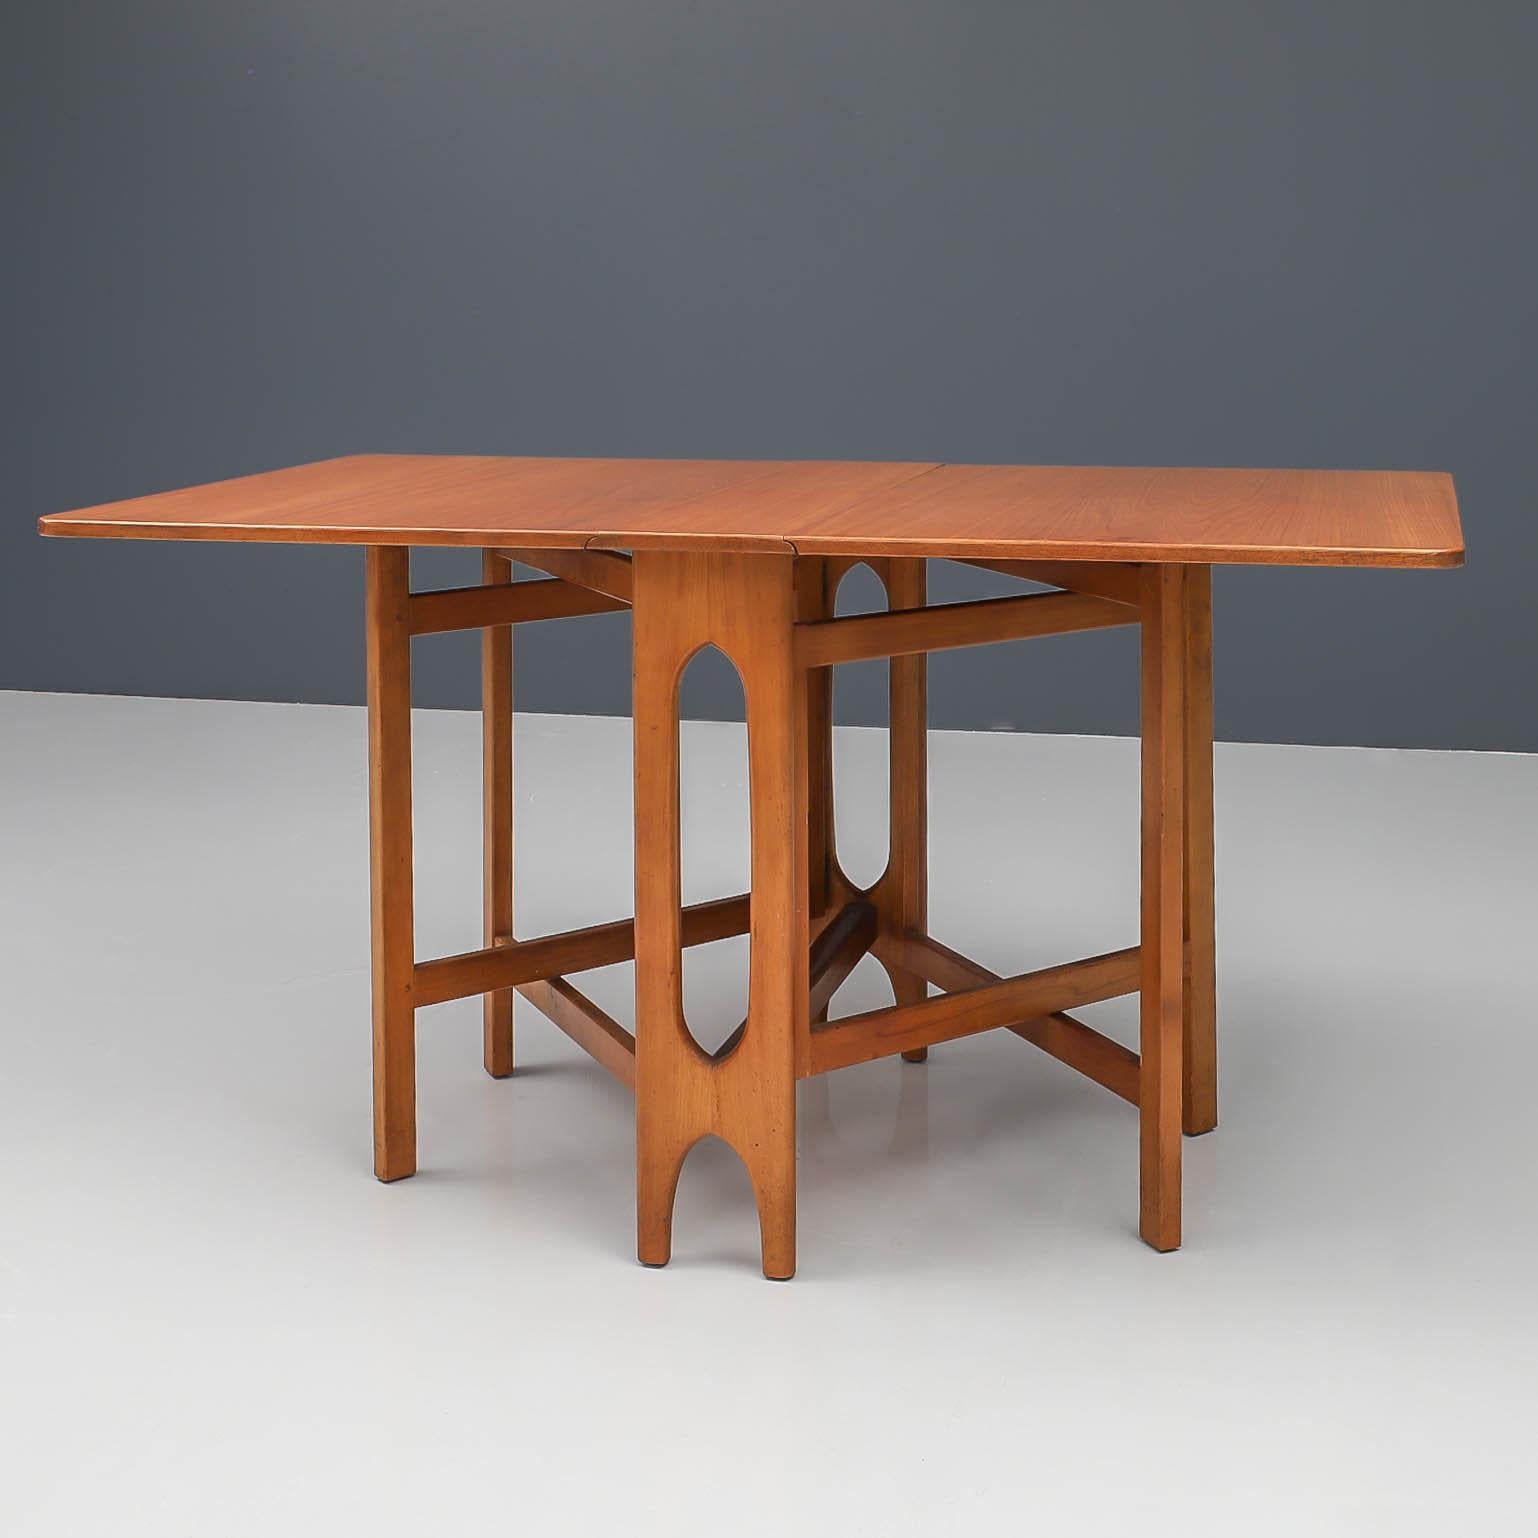 Clever dining table with interesting base that folds out to let the drop-leaves rest on. Nice geometrical shapes and made with a lot of care and precision. Very practical design and perfectly suitable for smaller houses in larger city's. The colour